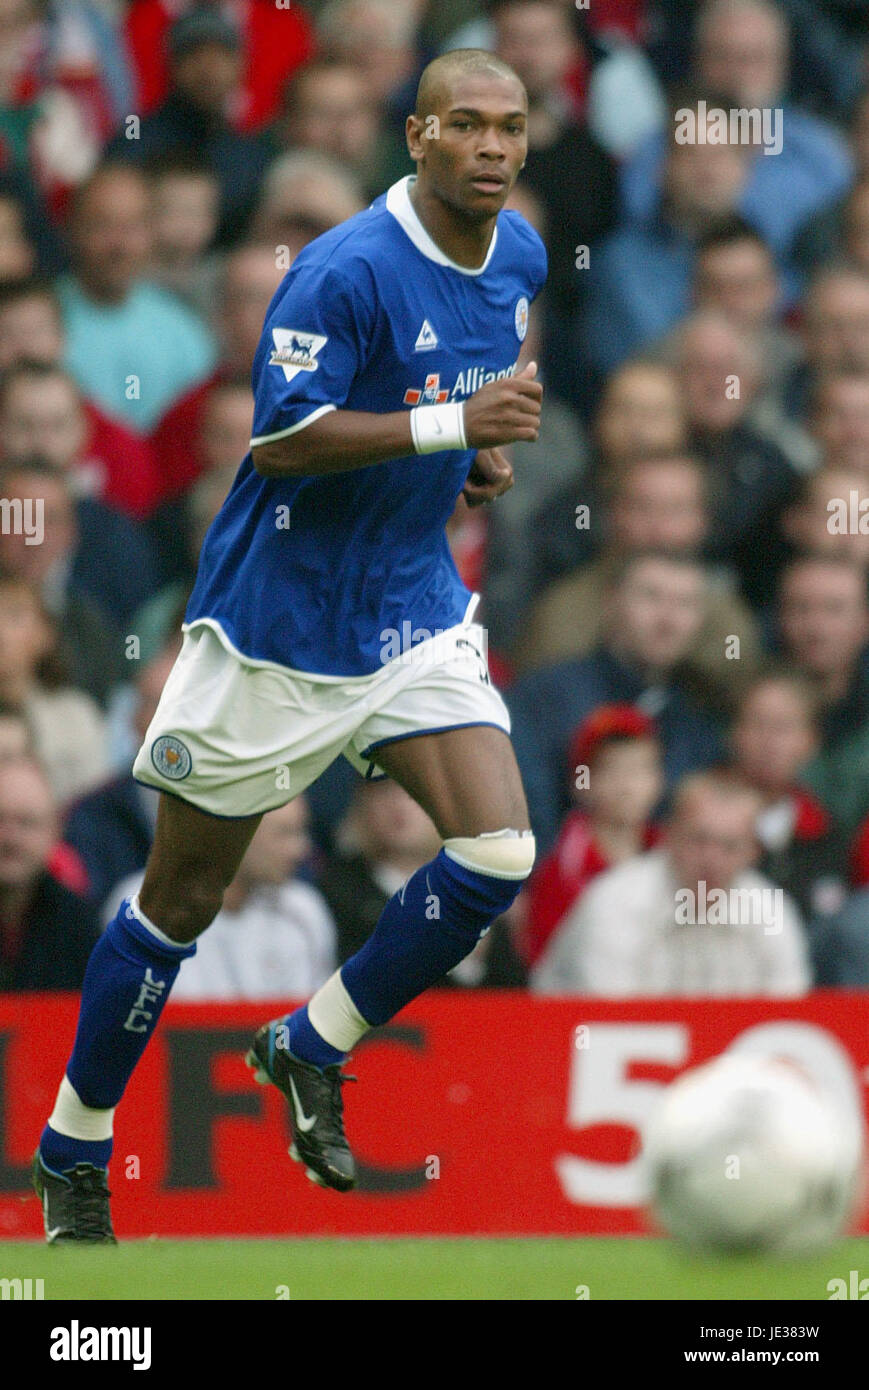 MARCUS BENT LEICESTER CITY FC Anfield Road LIVERPOOL ENGLAND 20. September 2003 Stockfoto